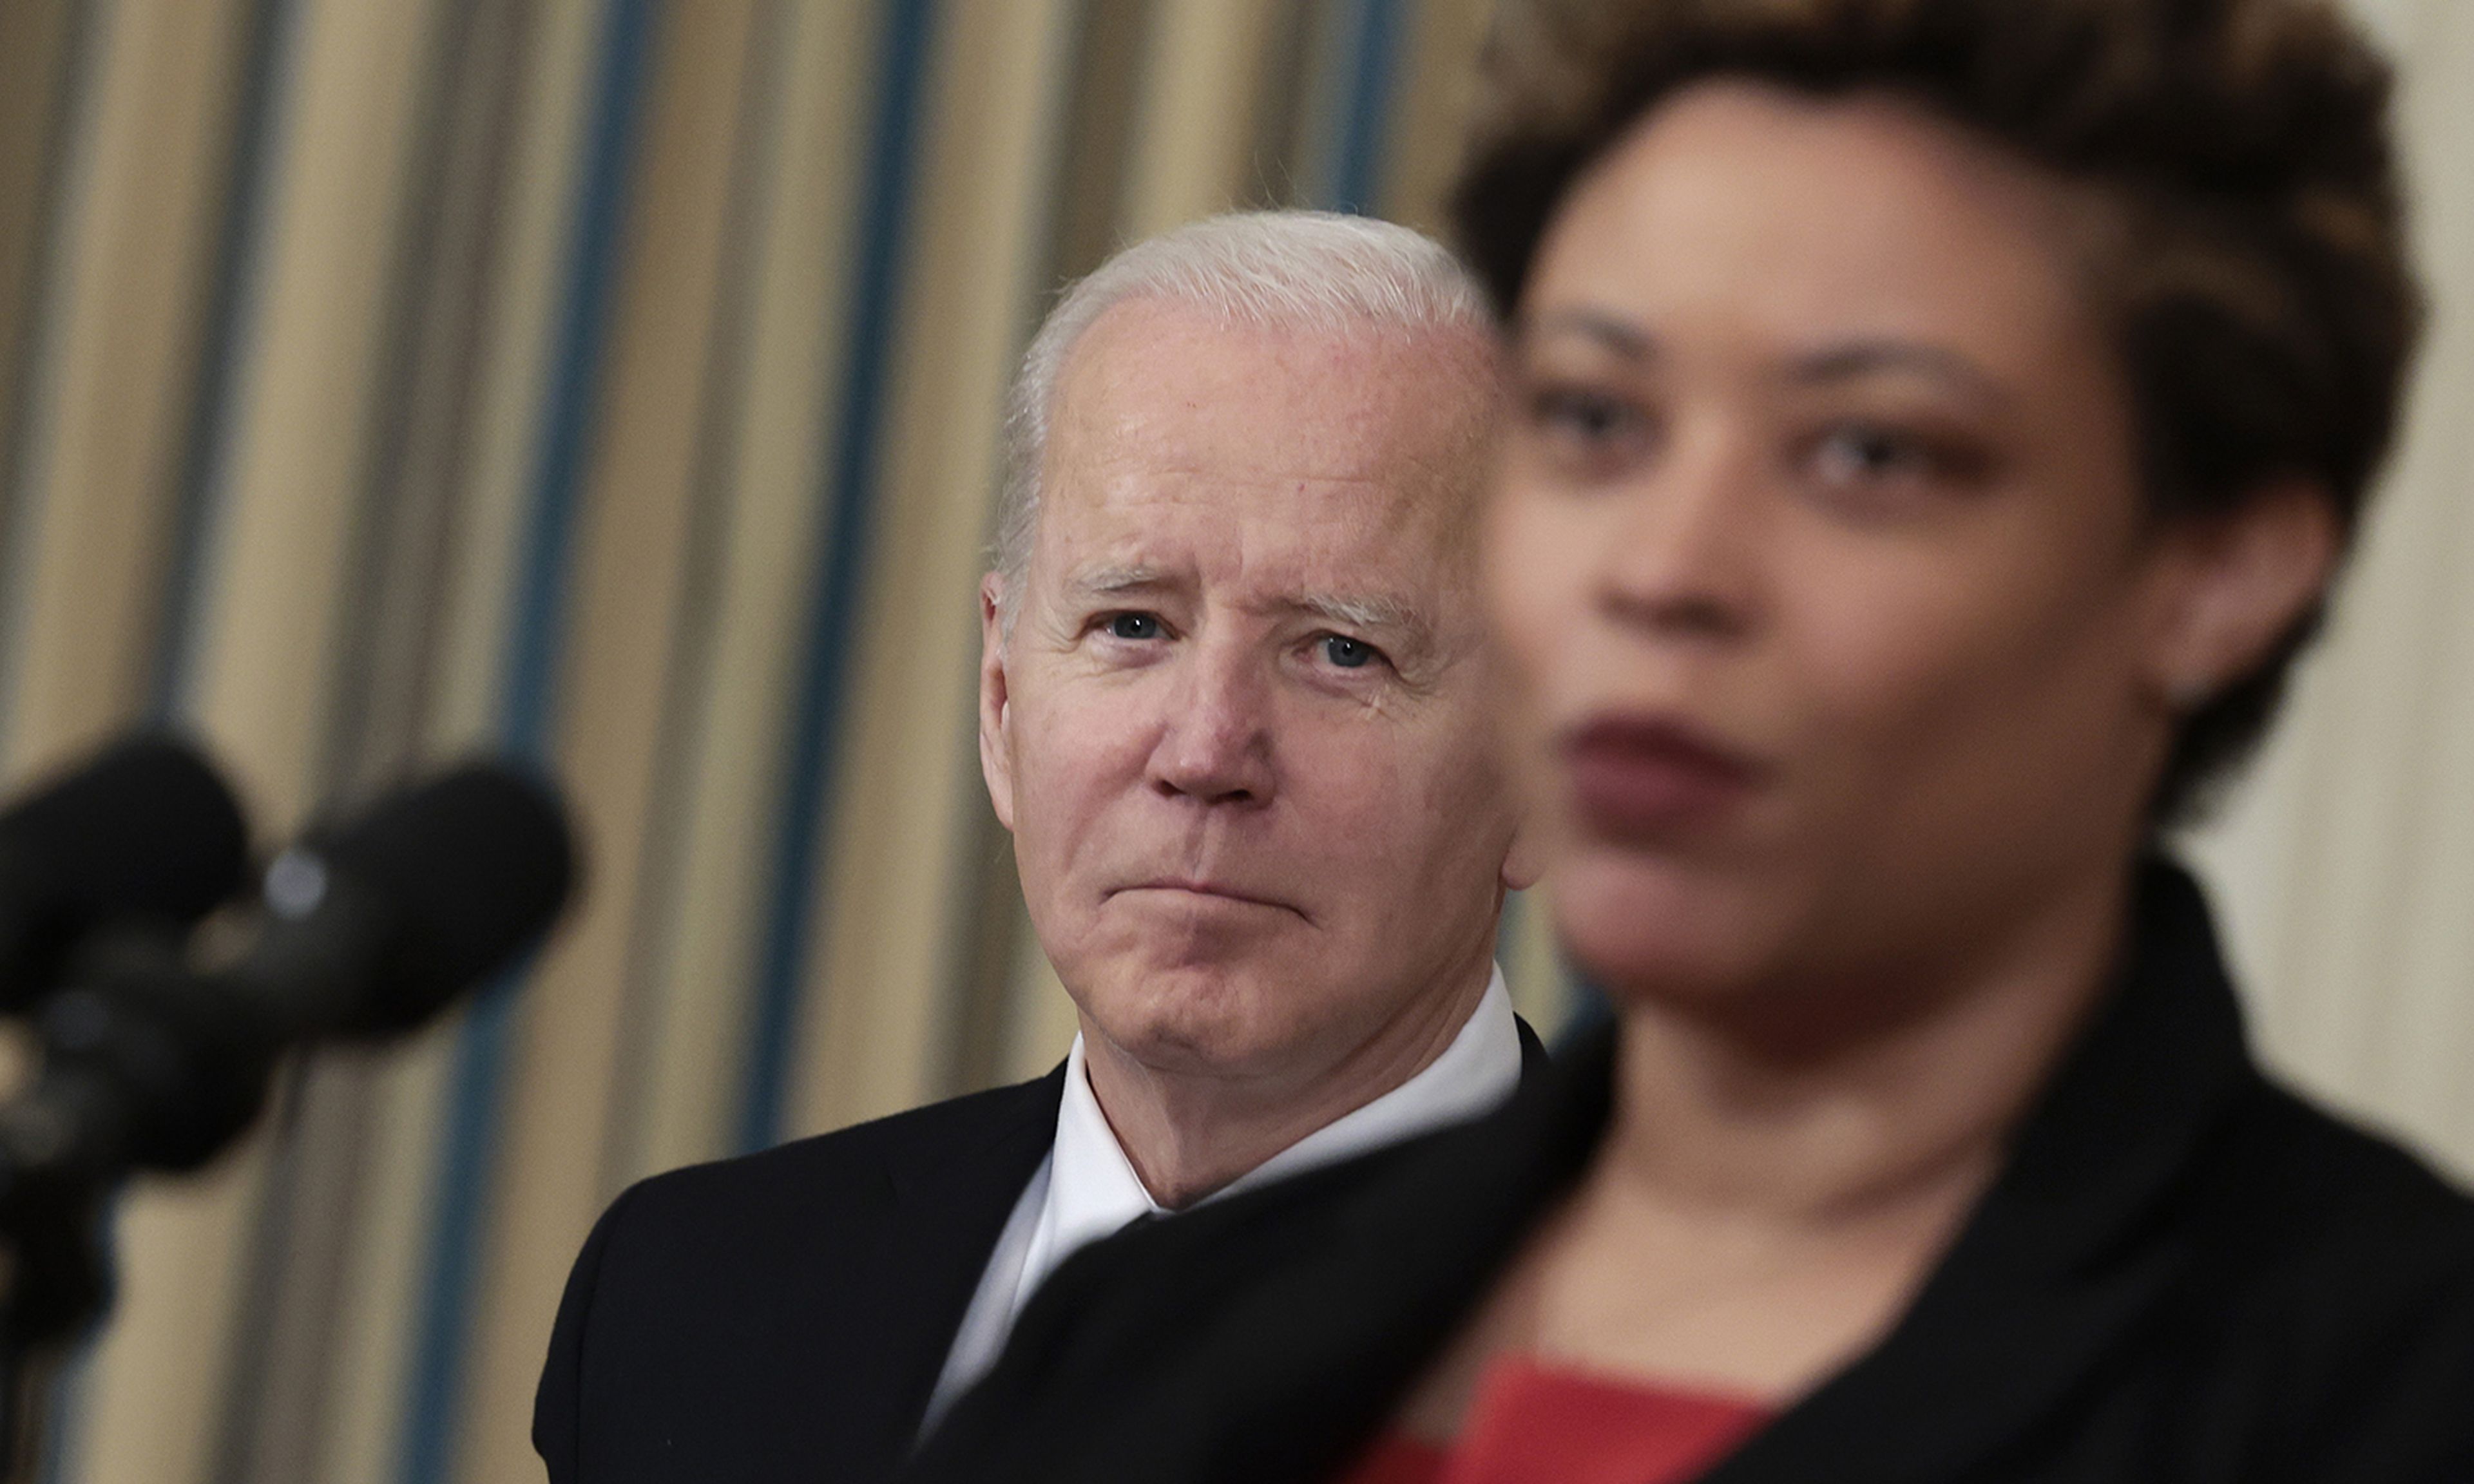 President Joe Biden listens as Director of the Office of Management and Budget Shalanda Young introduces him before speaking on his budget for Fiscal Year 2023 at the White House on March 28, 2022, in Washington.